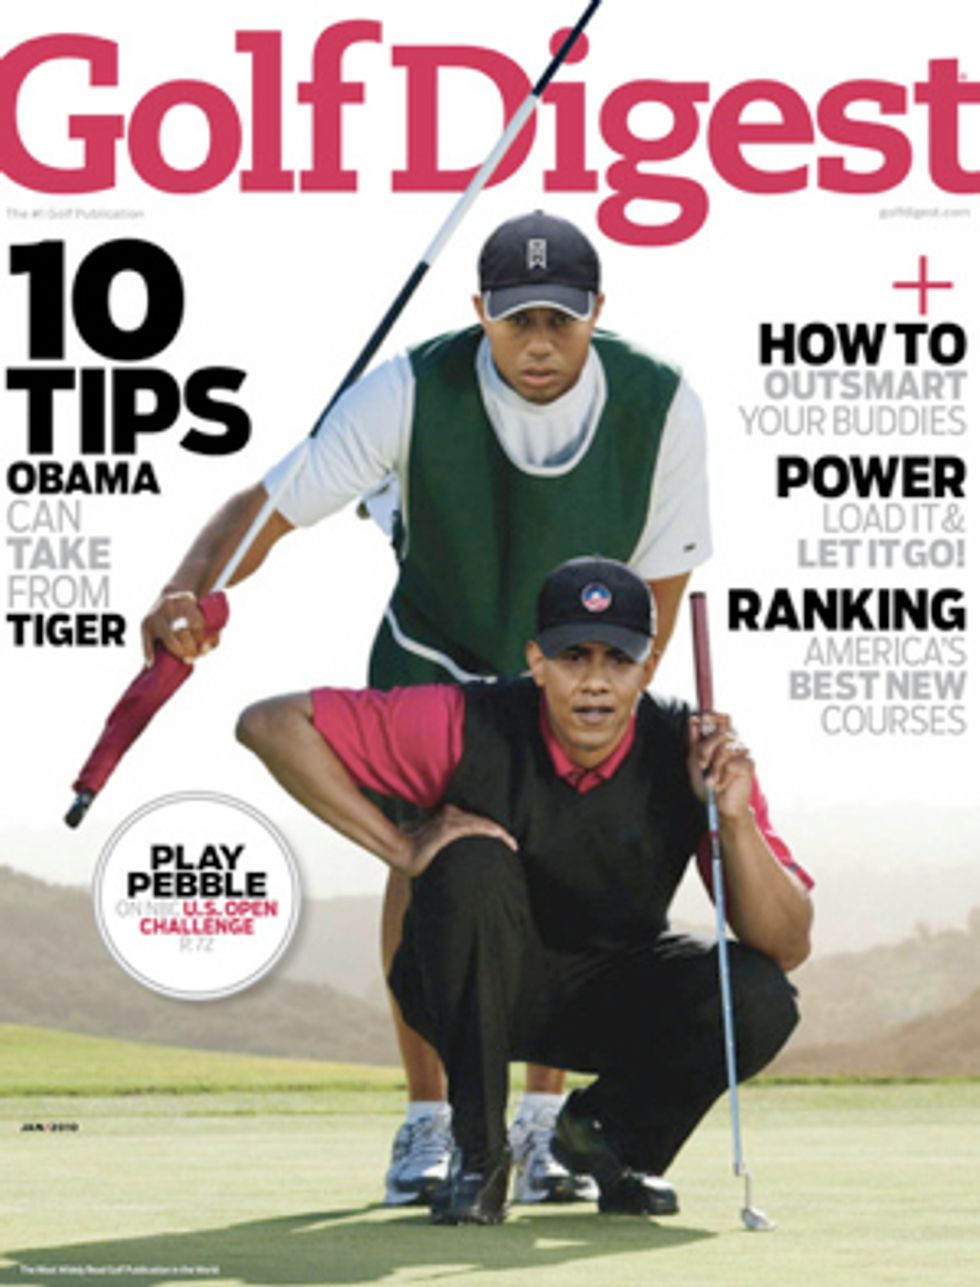 Barack Obama And Tiger Woods Are Connected In Some Scandal Maybe?